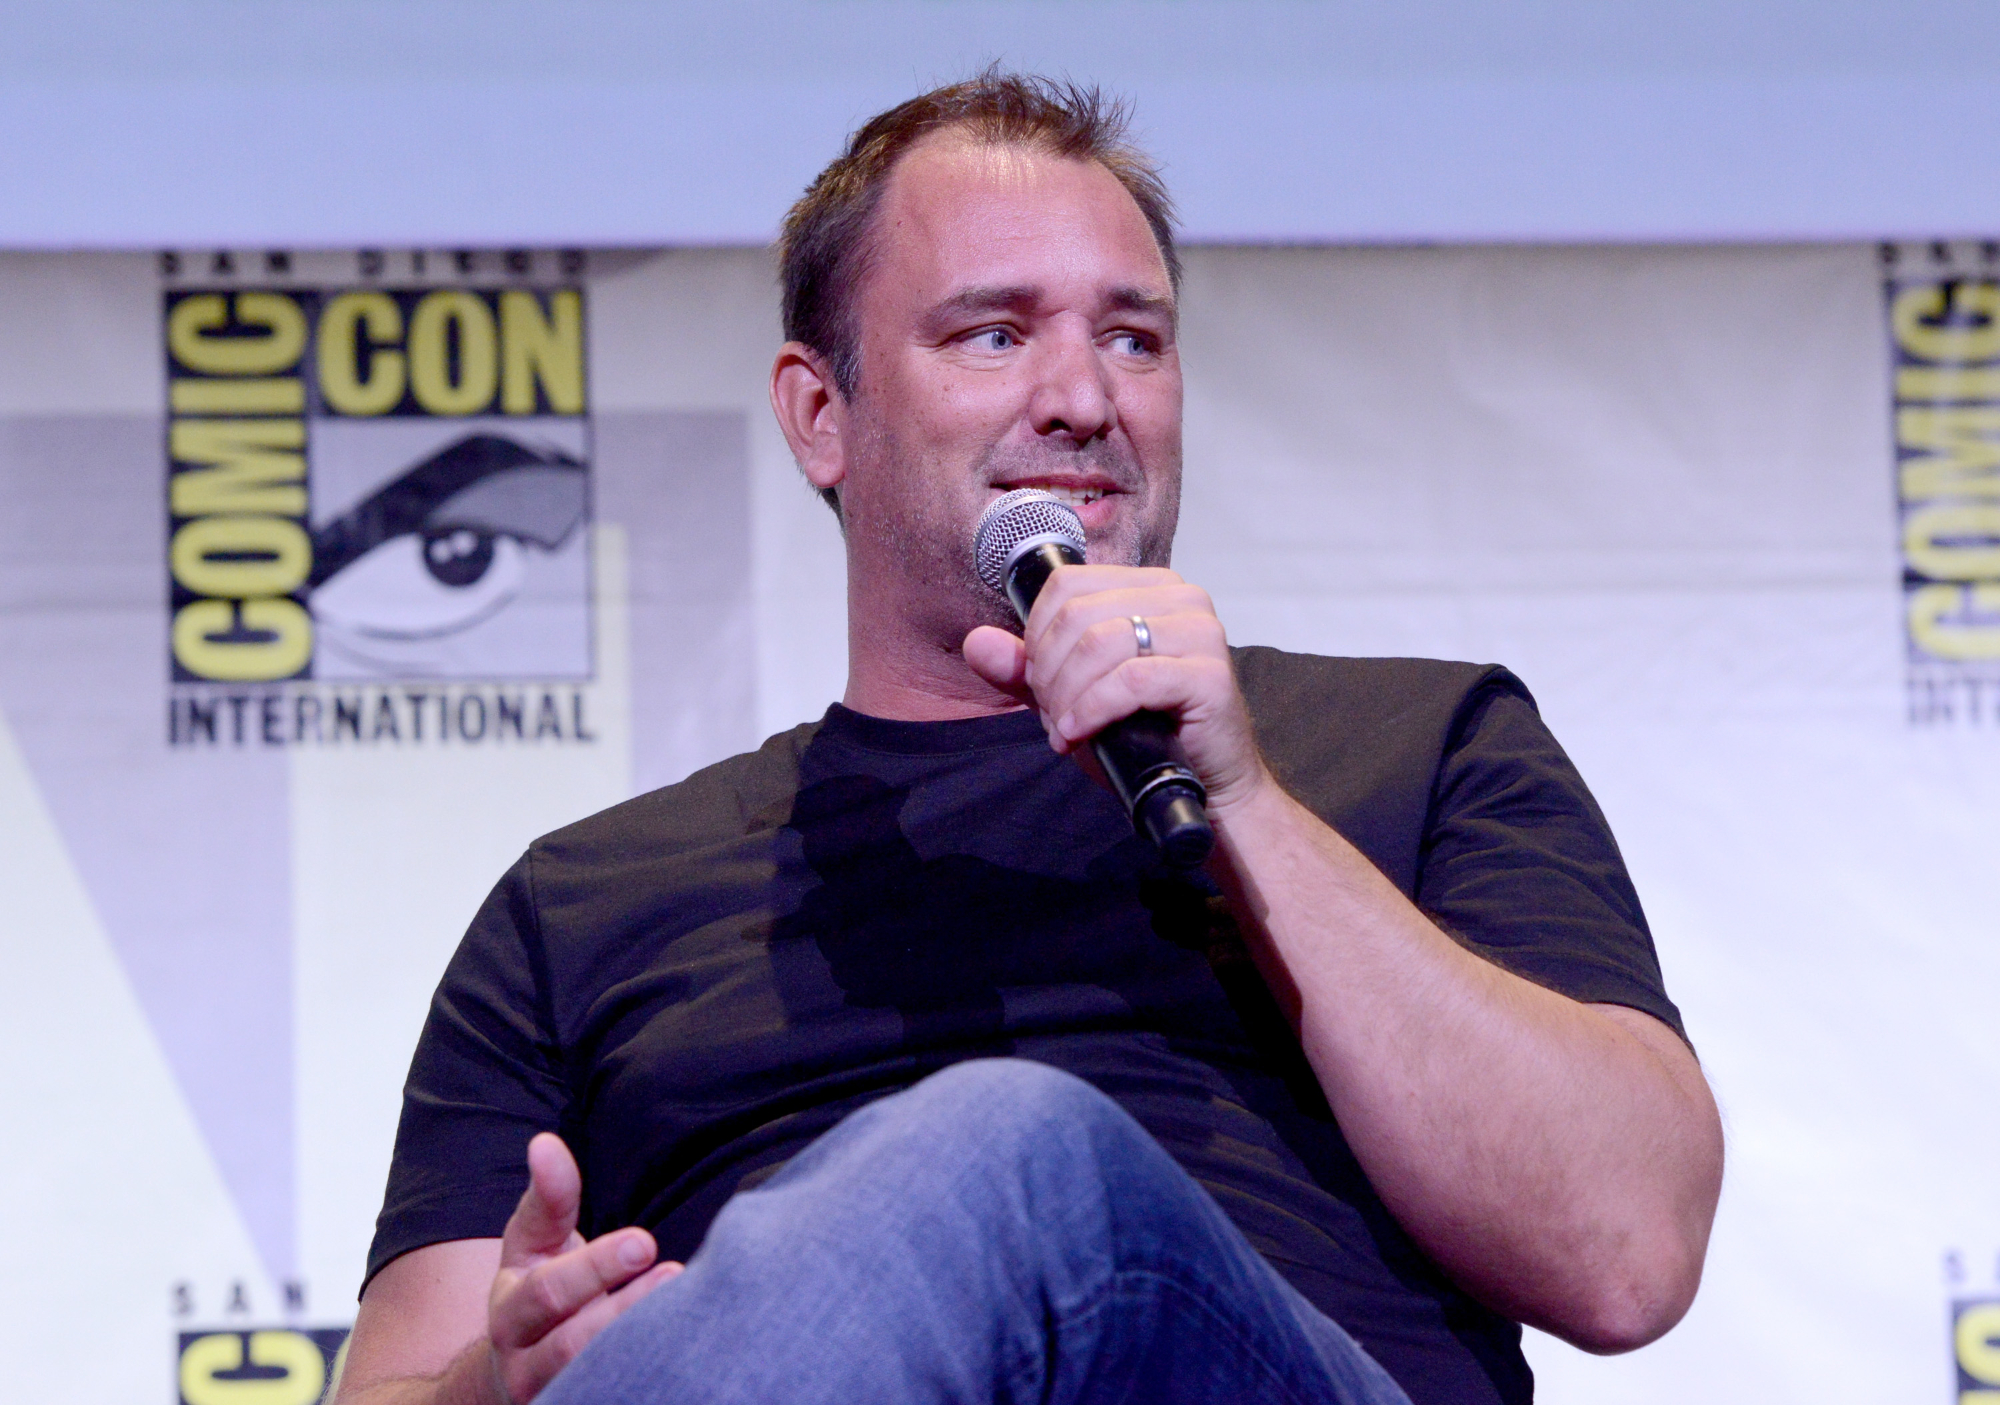 'Cannibal! The Musical' movie director Trey Parker wearing a crew neck shirt and blue jeans holding a microphone in front of the Comic Con logo